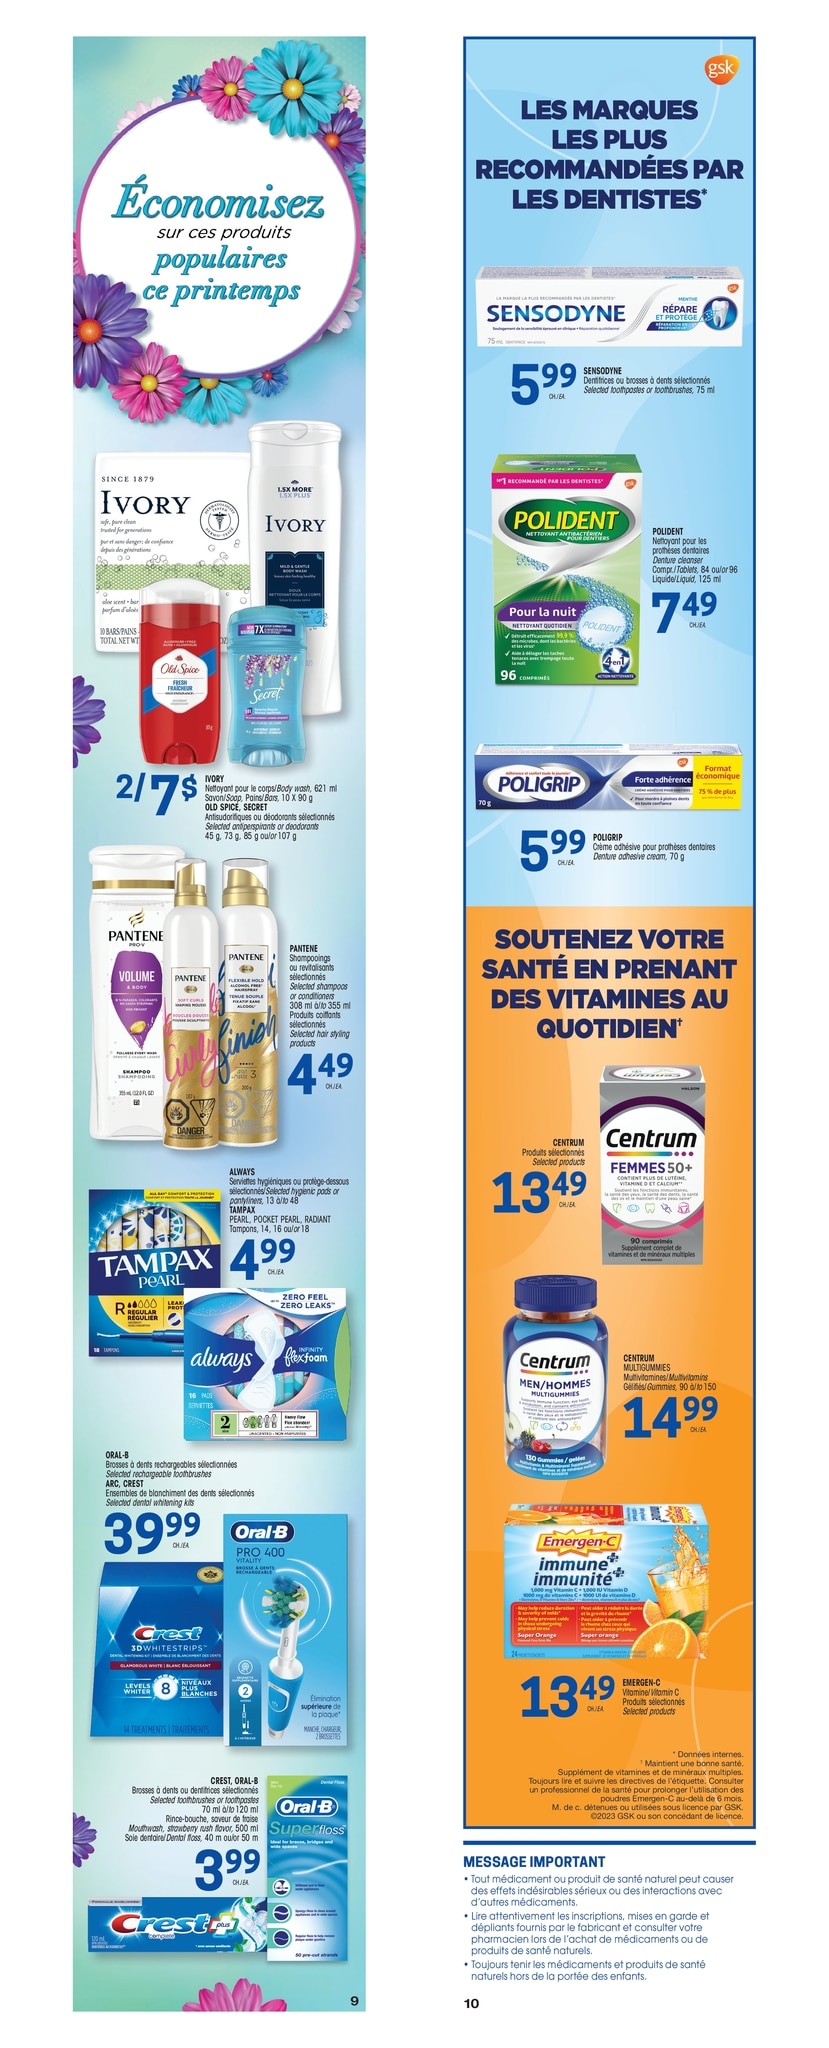 Uniprix - Weekly Flyer Specials - Page 12